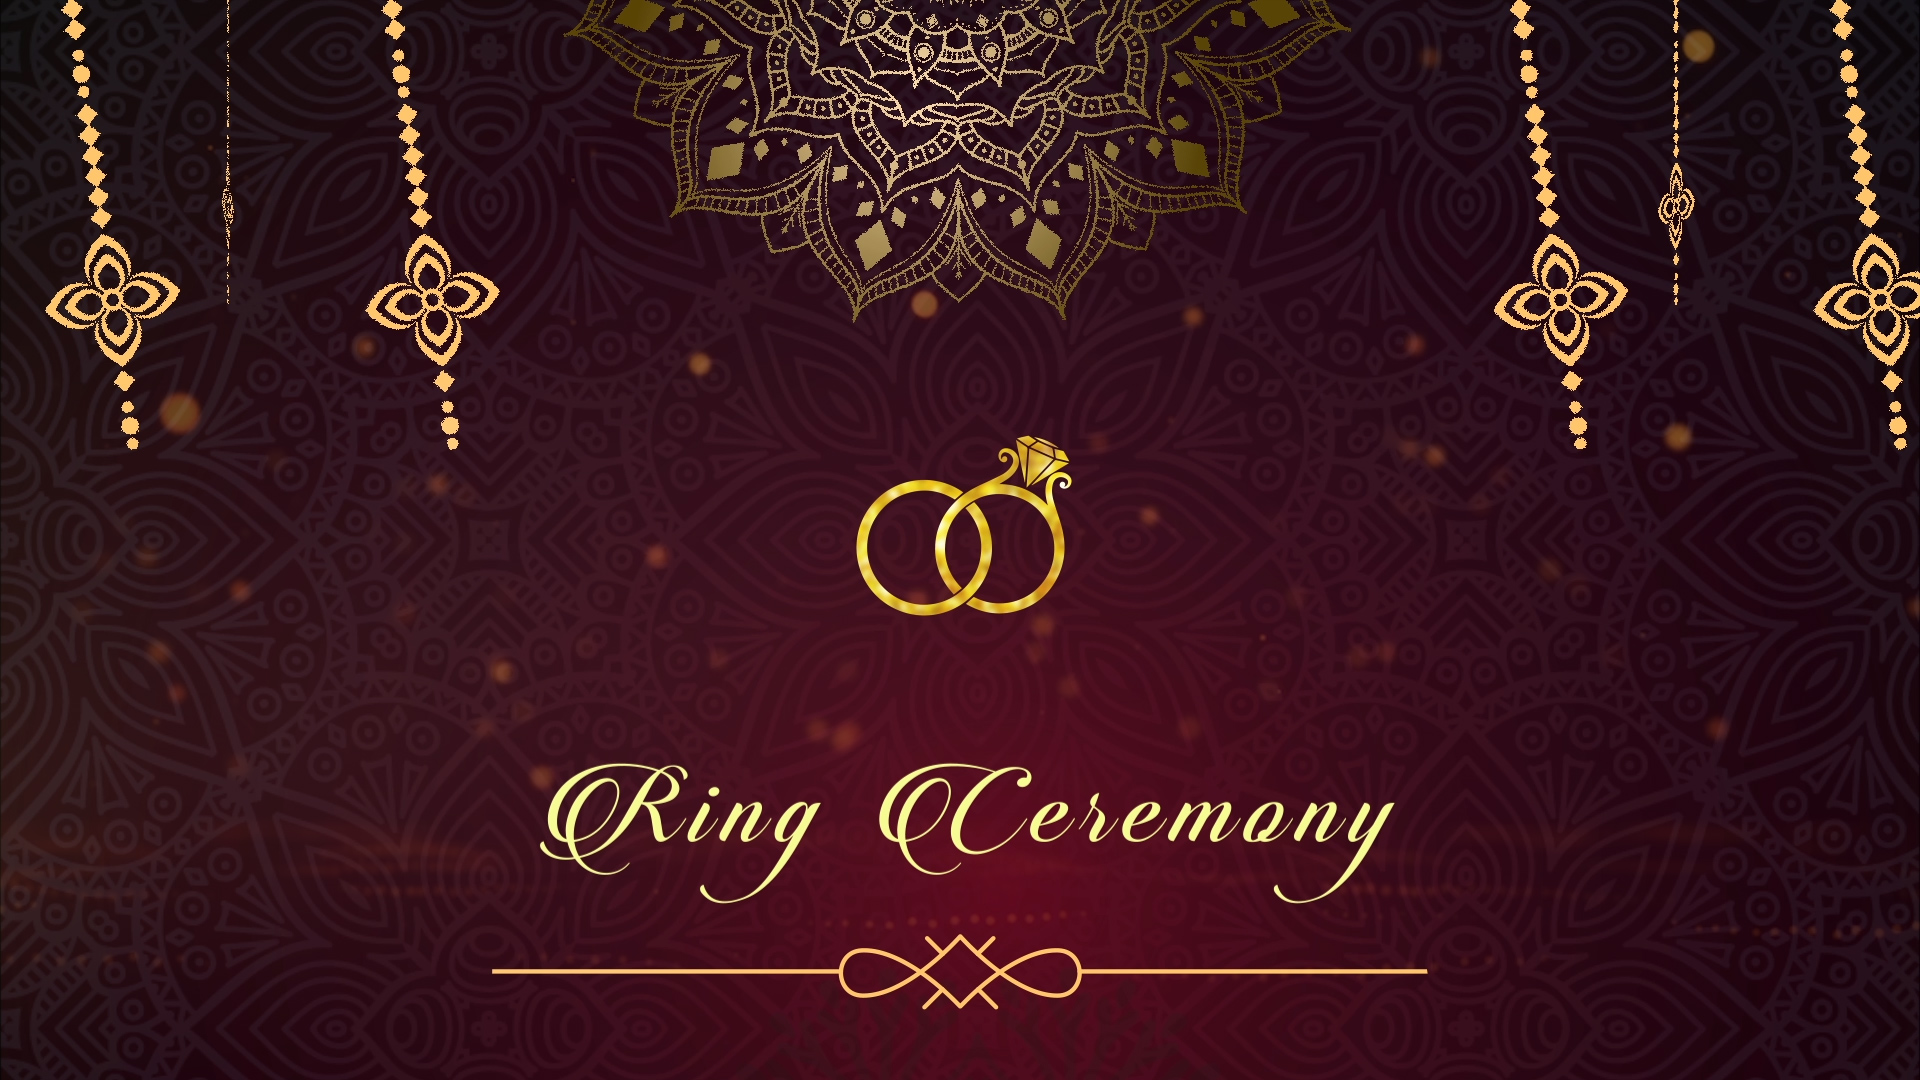 Animated Ring Ceremony - Engagement Video Invitation (WhatsApp compatible)  - YouTube